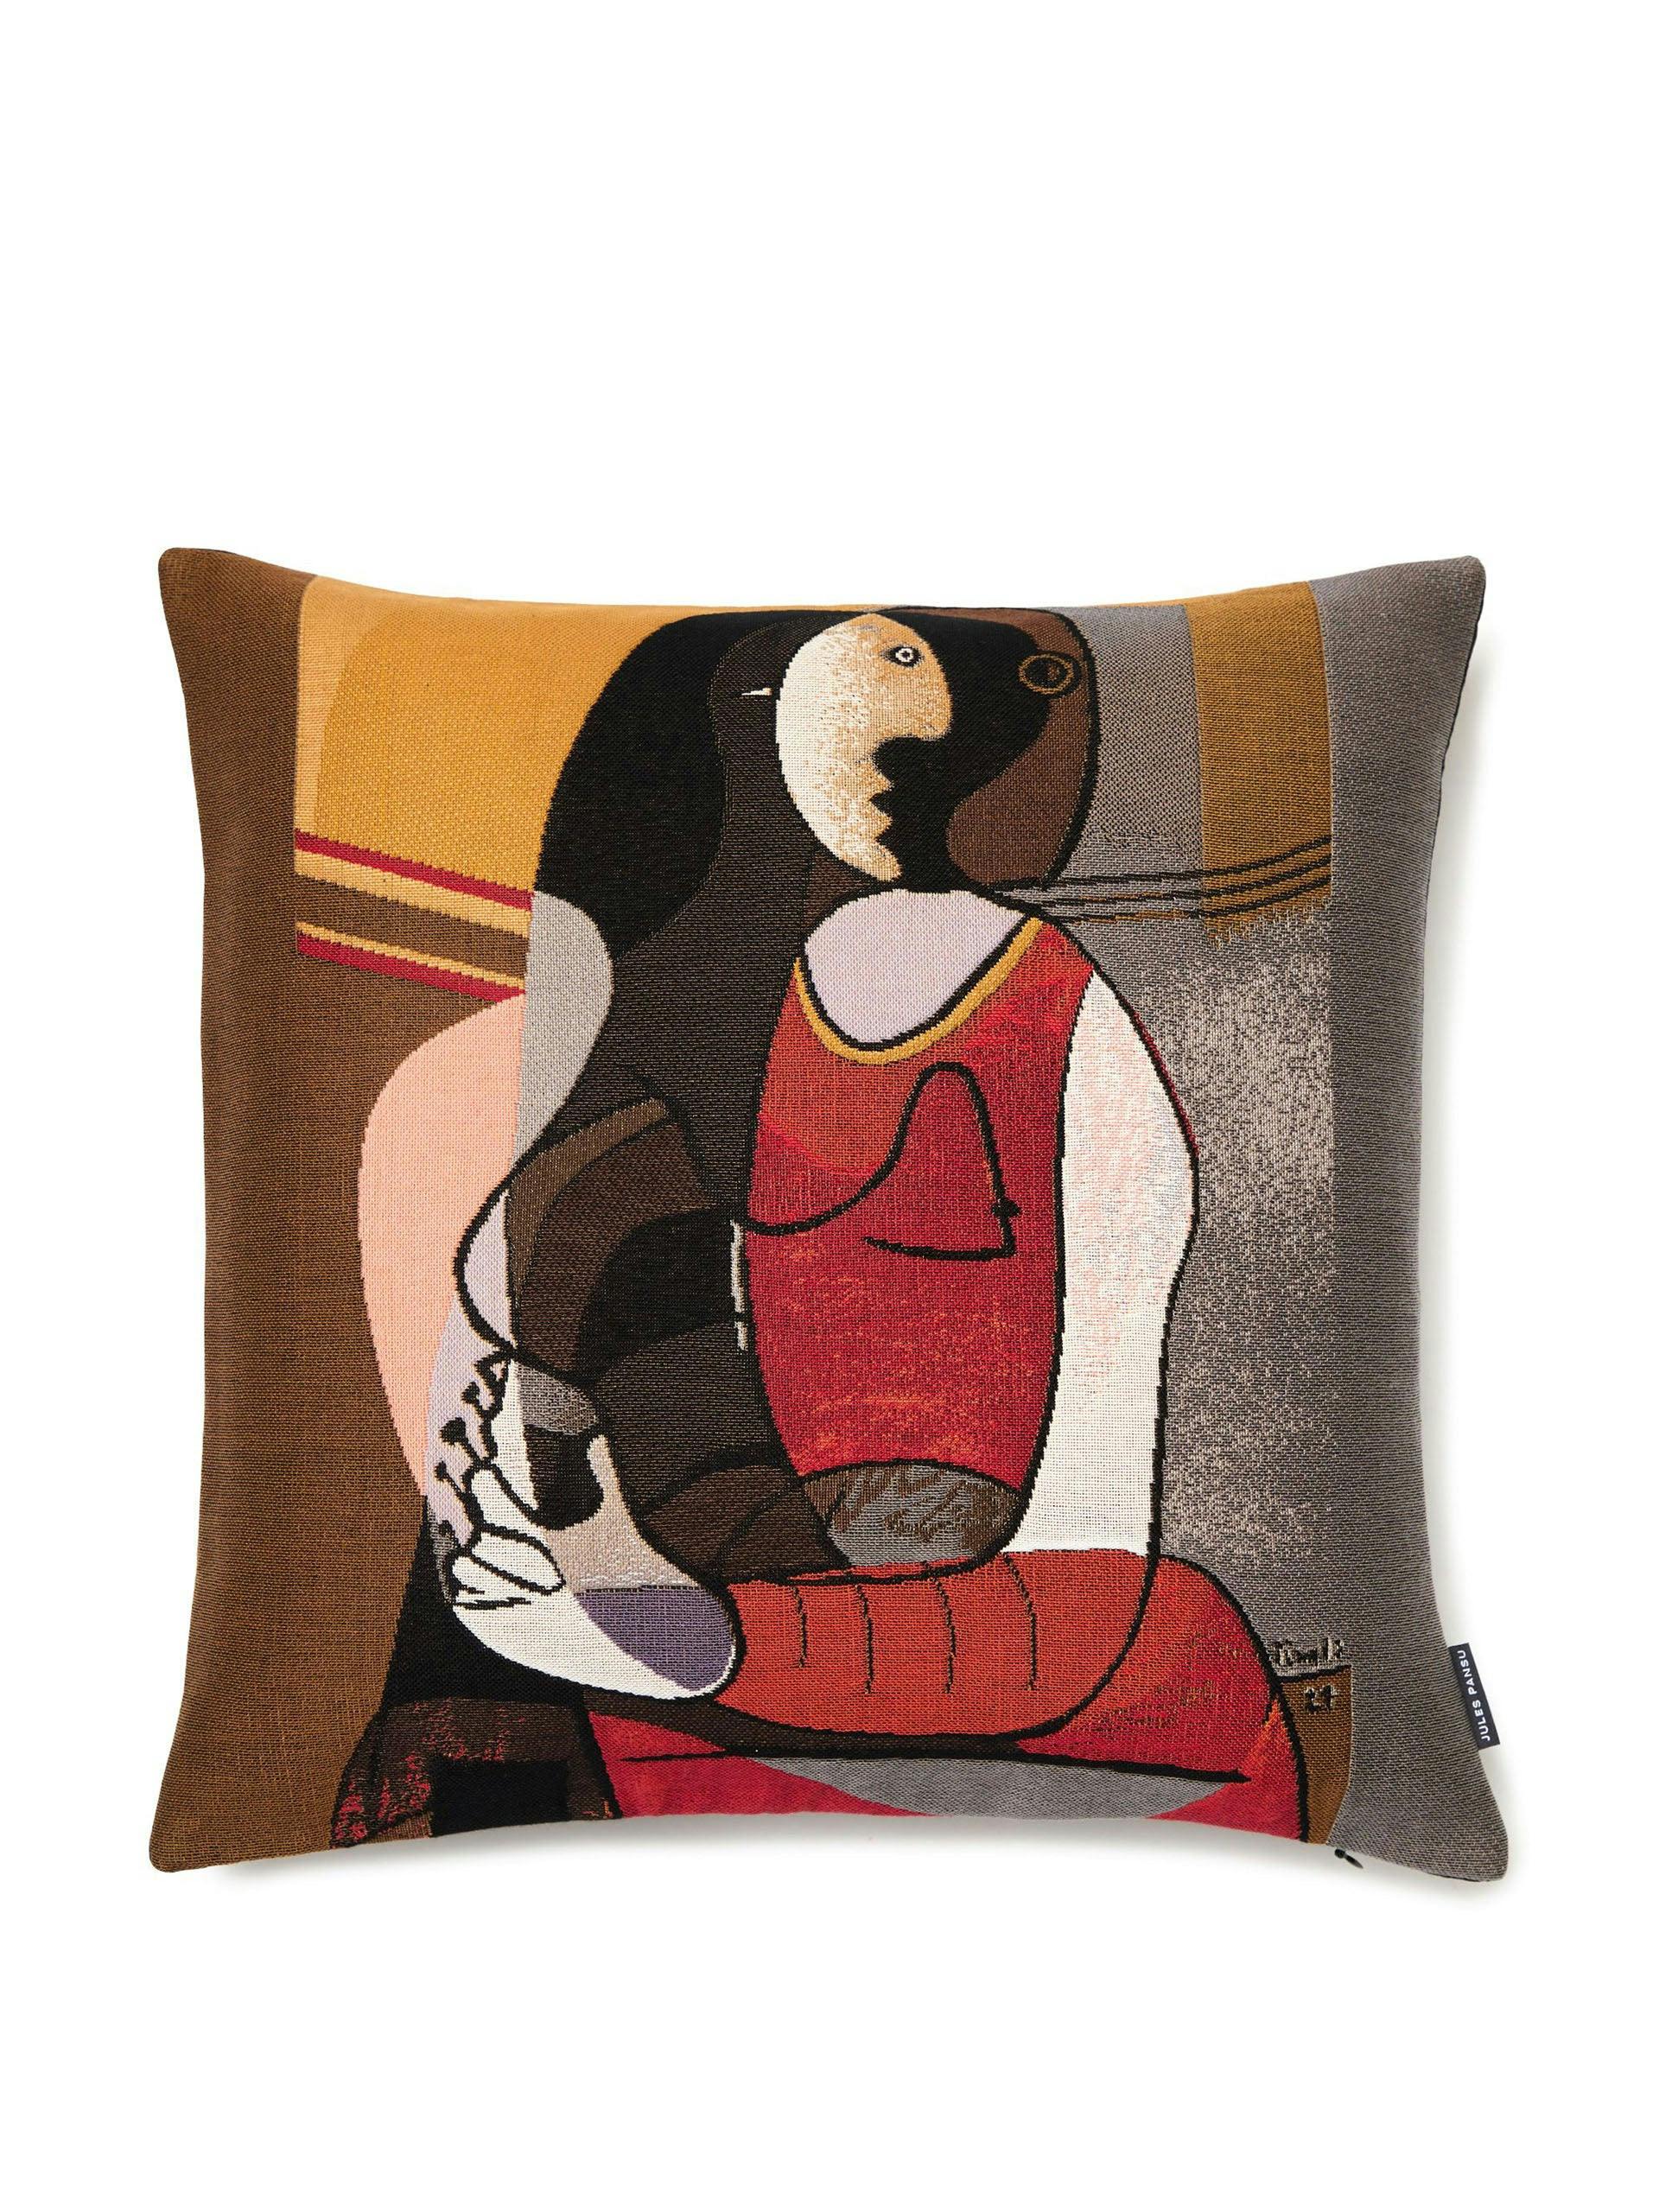 Picasso 'Femme Assise' cushion cover